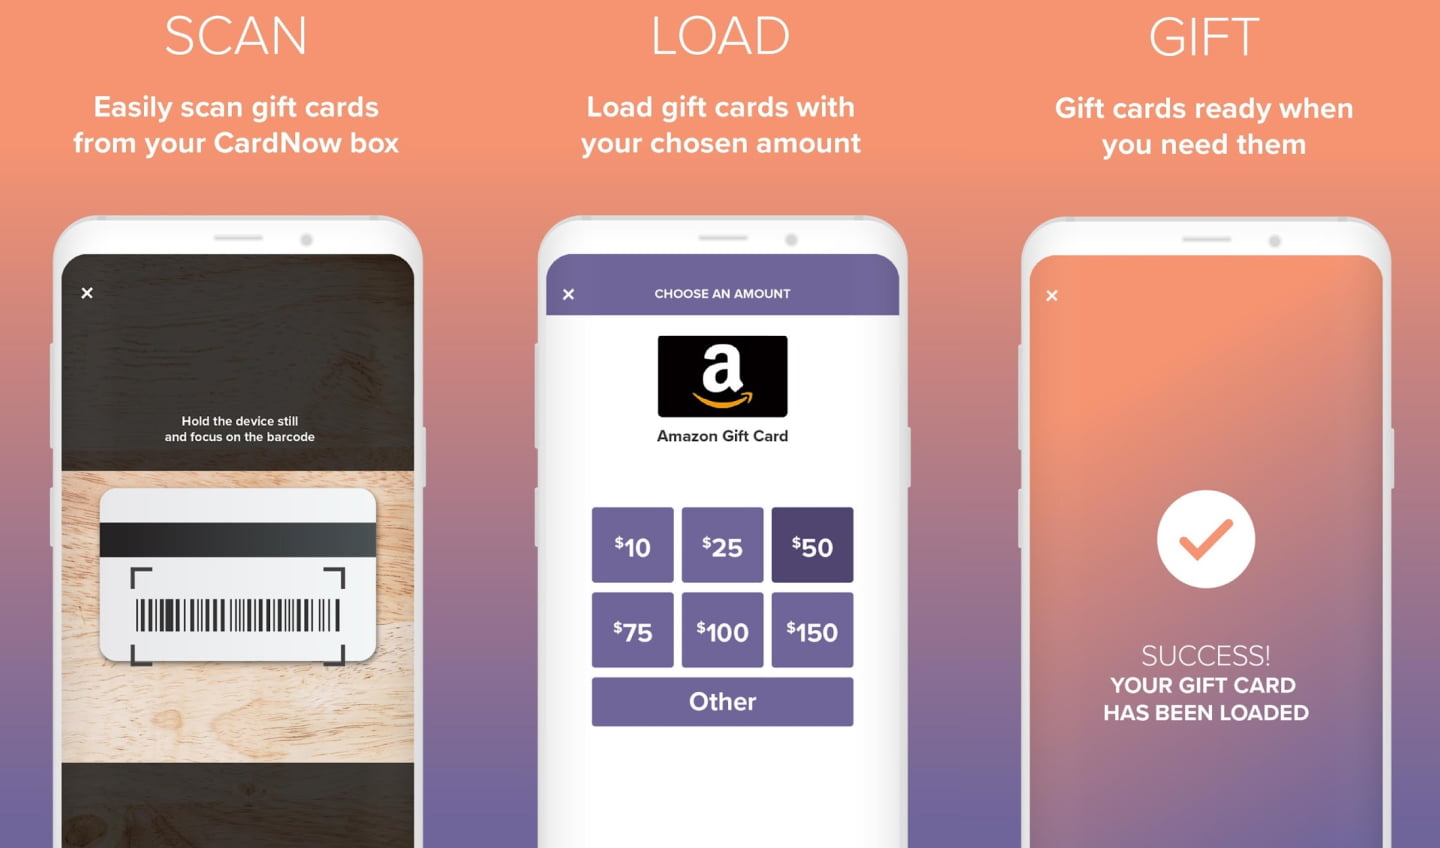 Steps for loading a gift card in the CardNow app